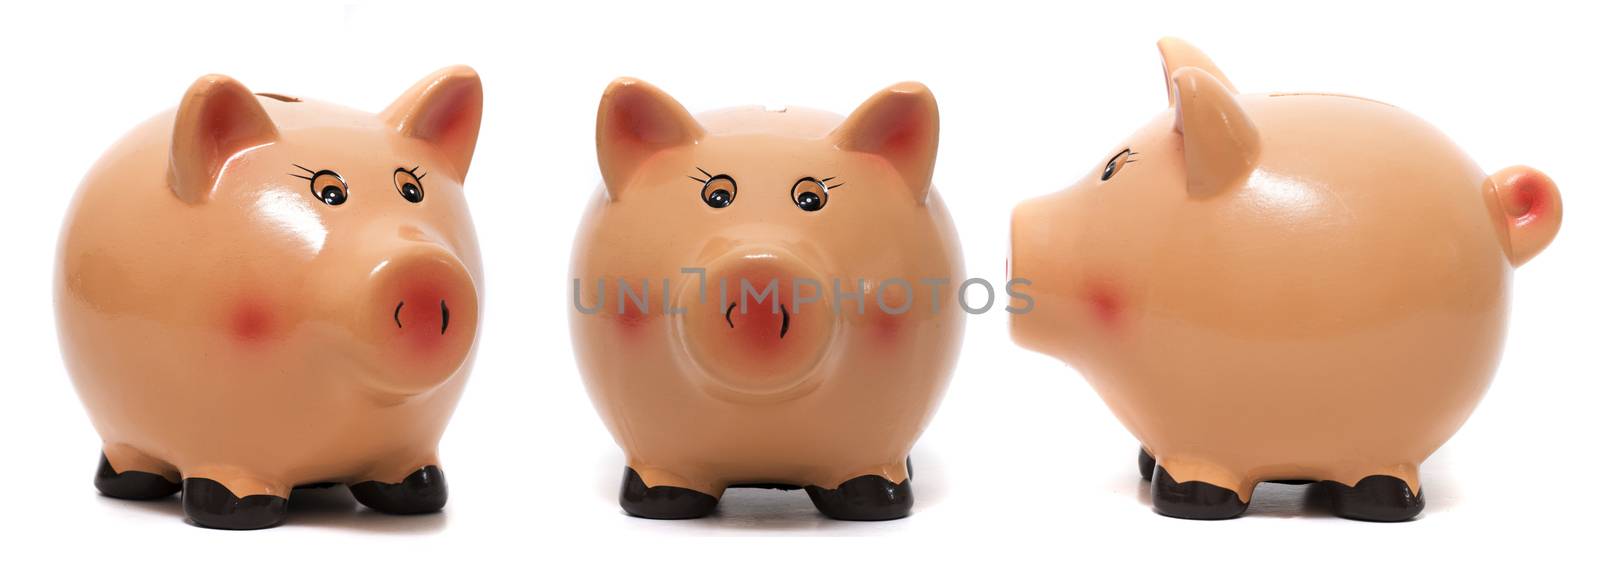 Close up view of a cute pink piggy bank isolated on a white background.